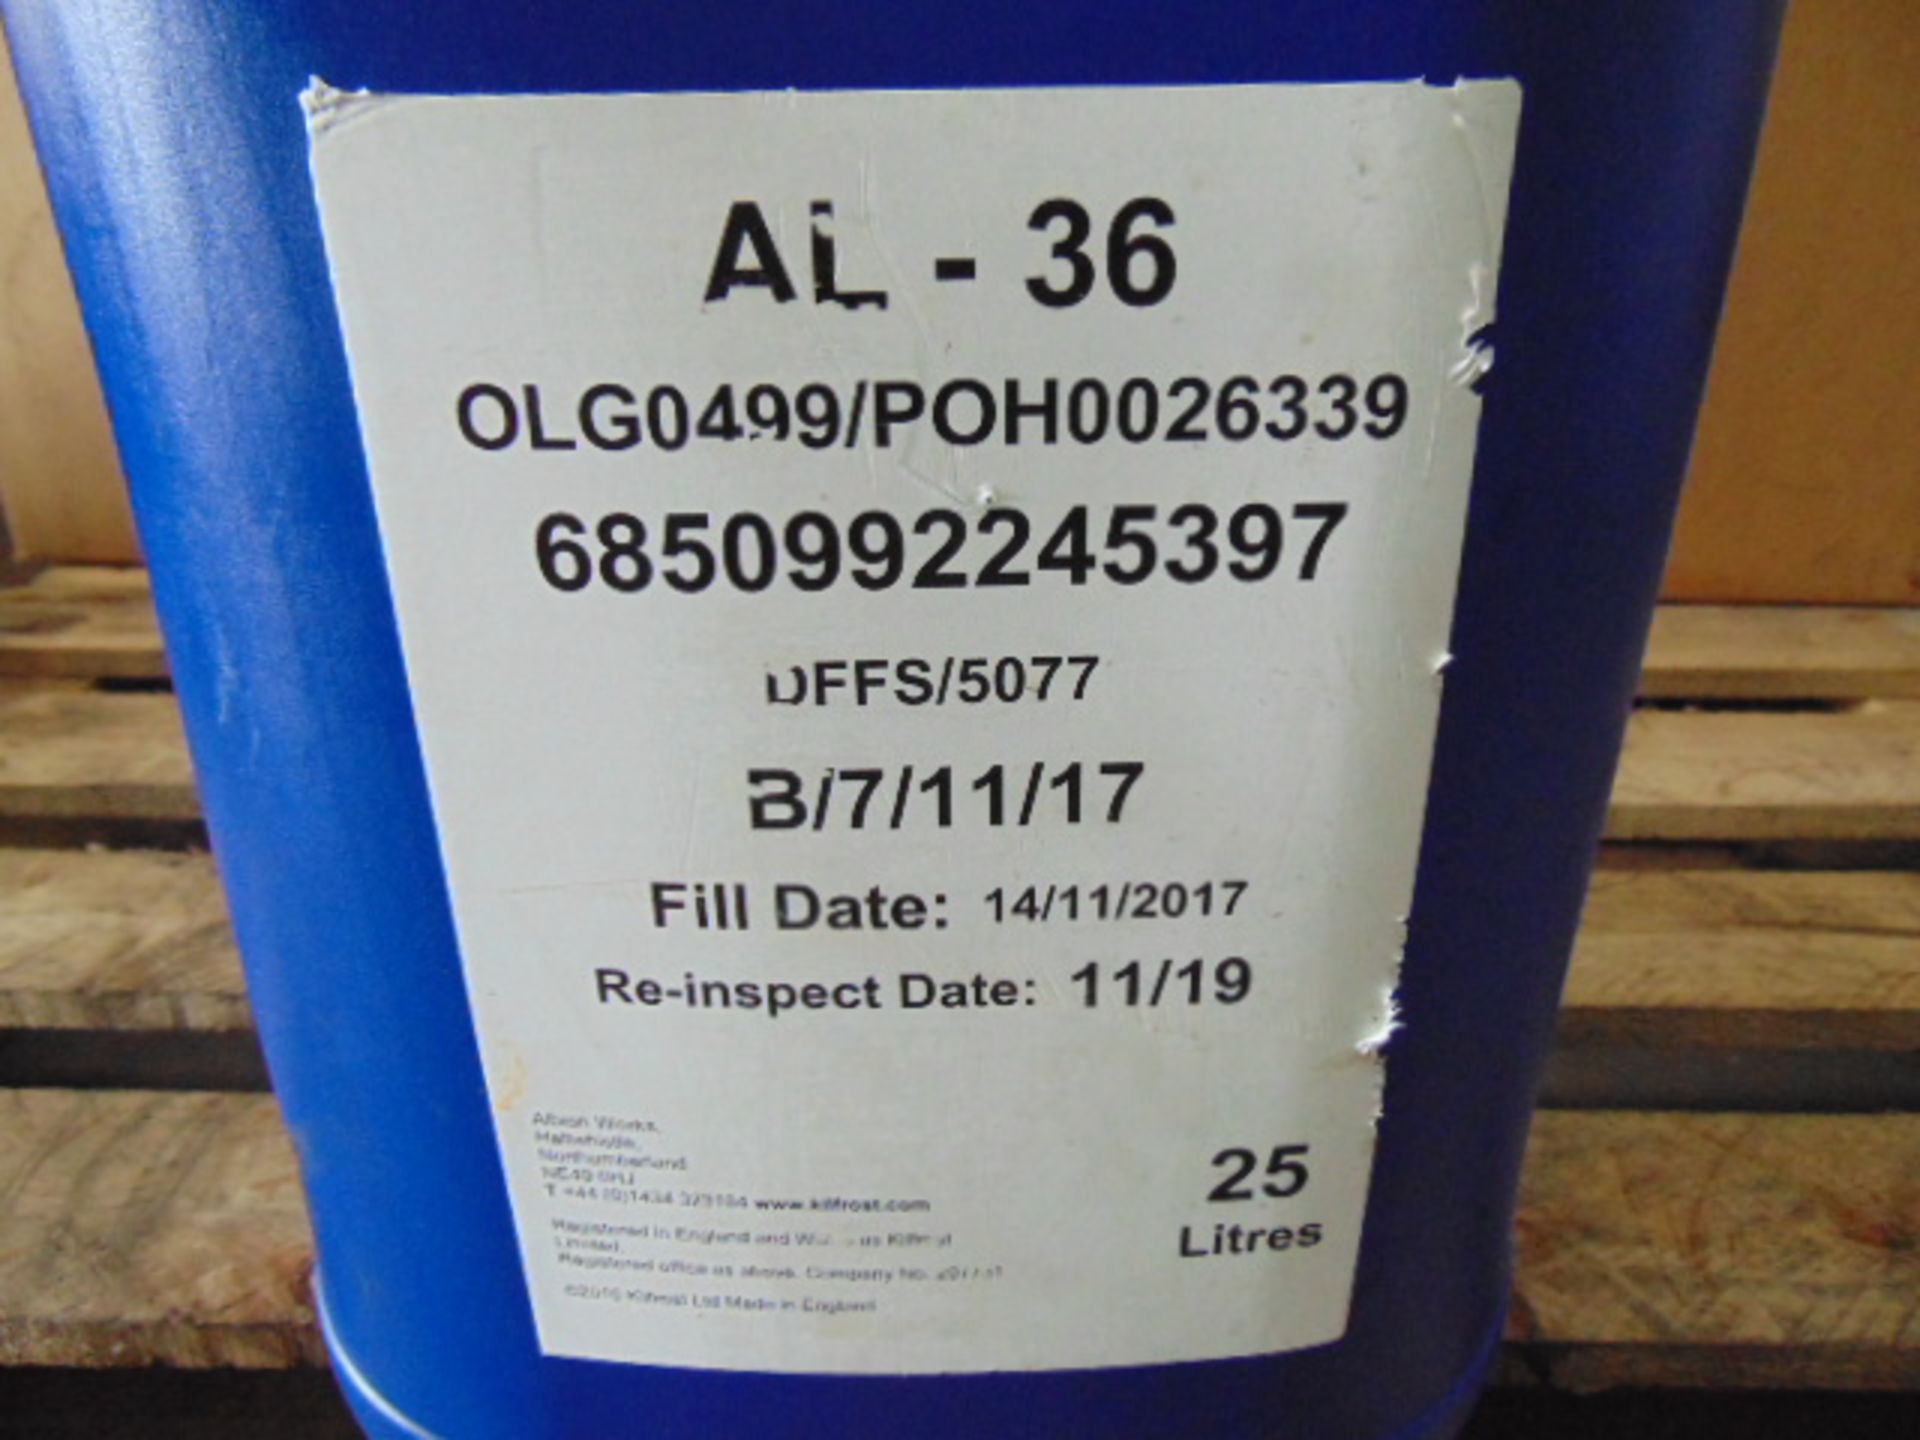 1 x Unissued 25L Tub of Kilfrost AL-36 Aircraft Windscreen Washer & De-Icer - Image 2 of 2